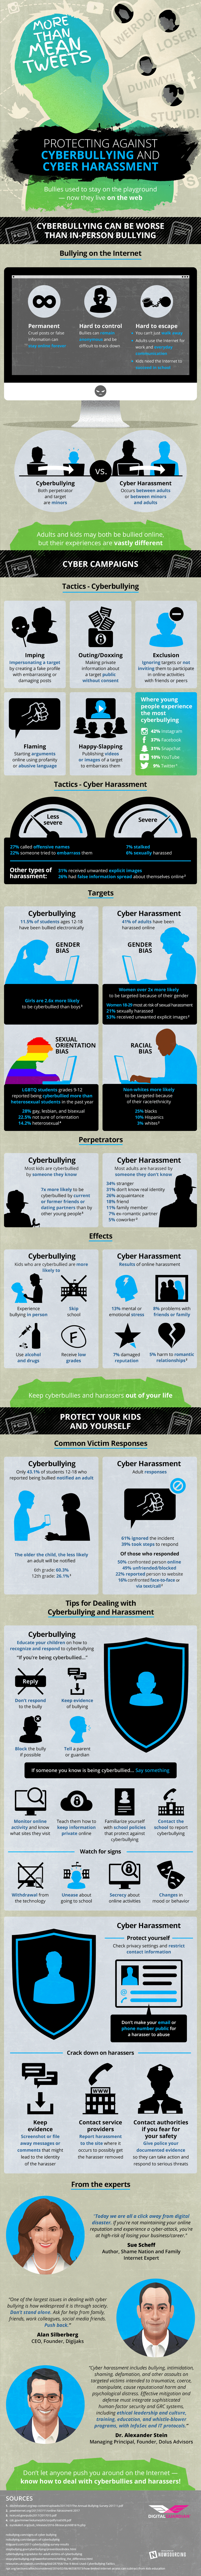 More Than Mean Tweets: Protecting Against Cyberbullying and Cyber Harassment Infographic